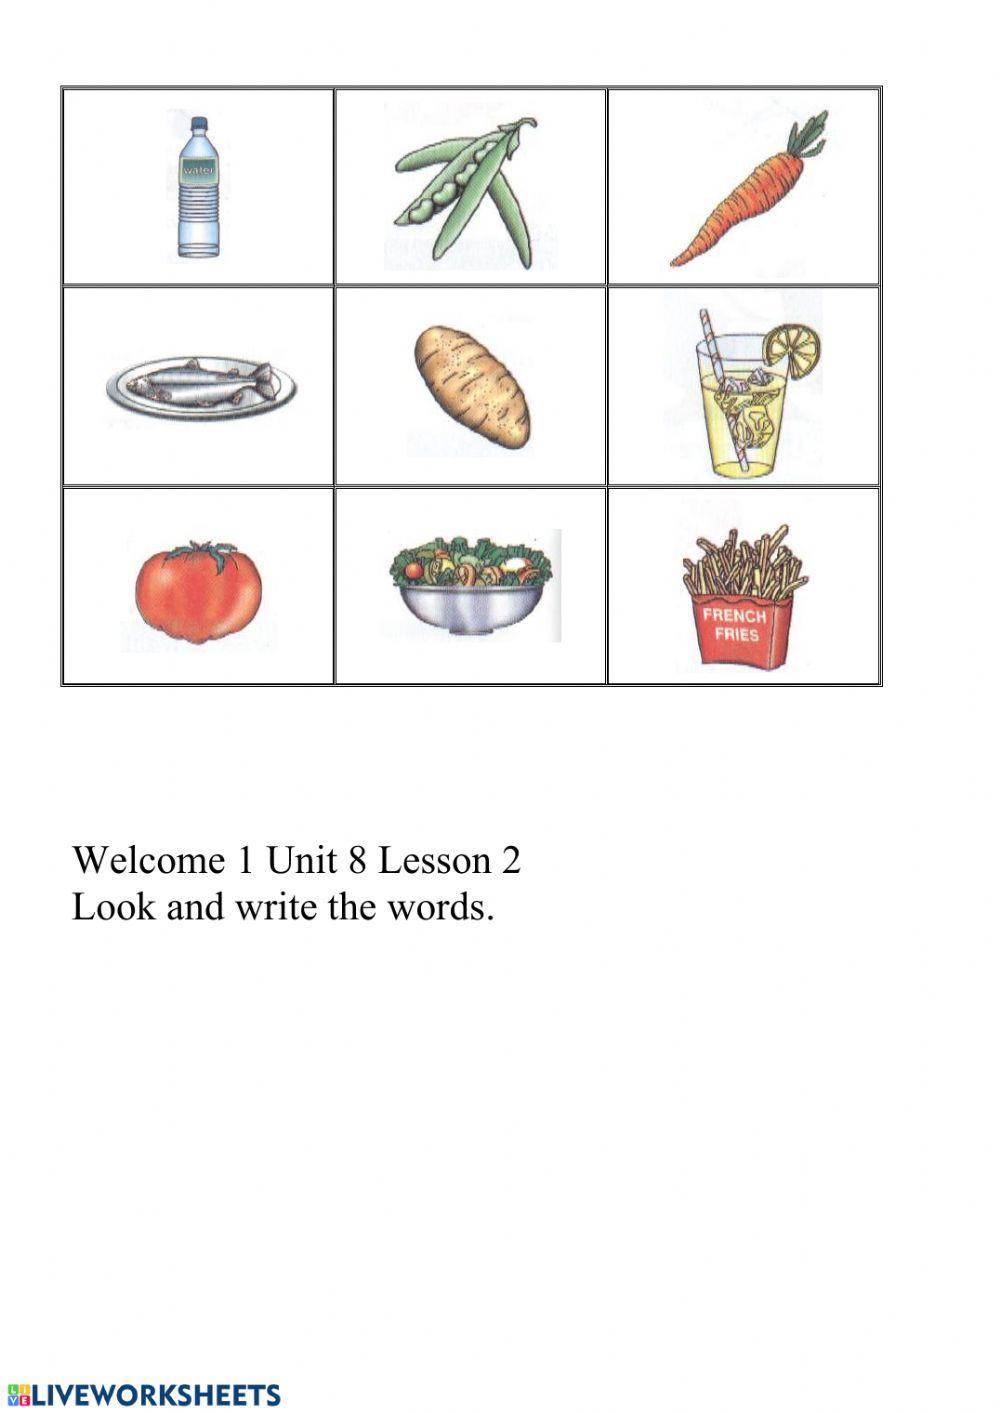 Welcome 1 Unit 8 Lesson 2